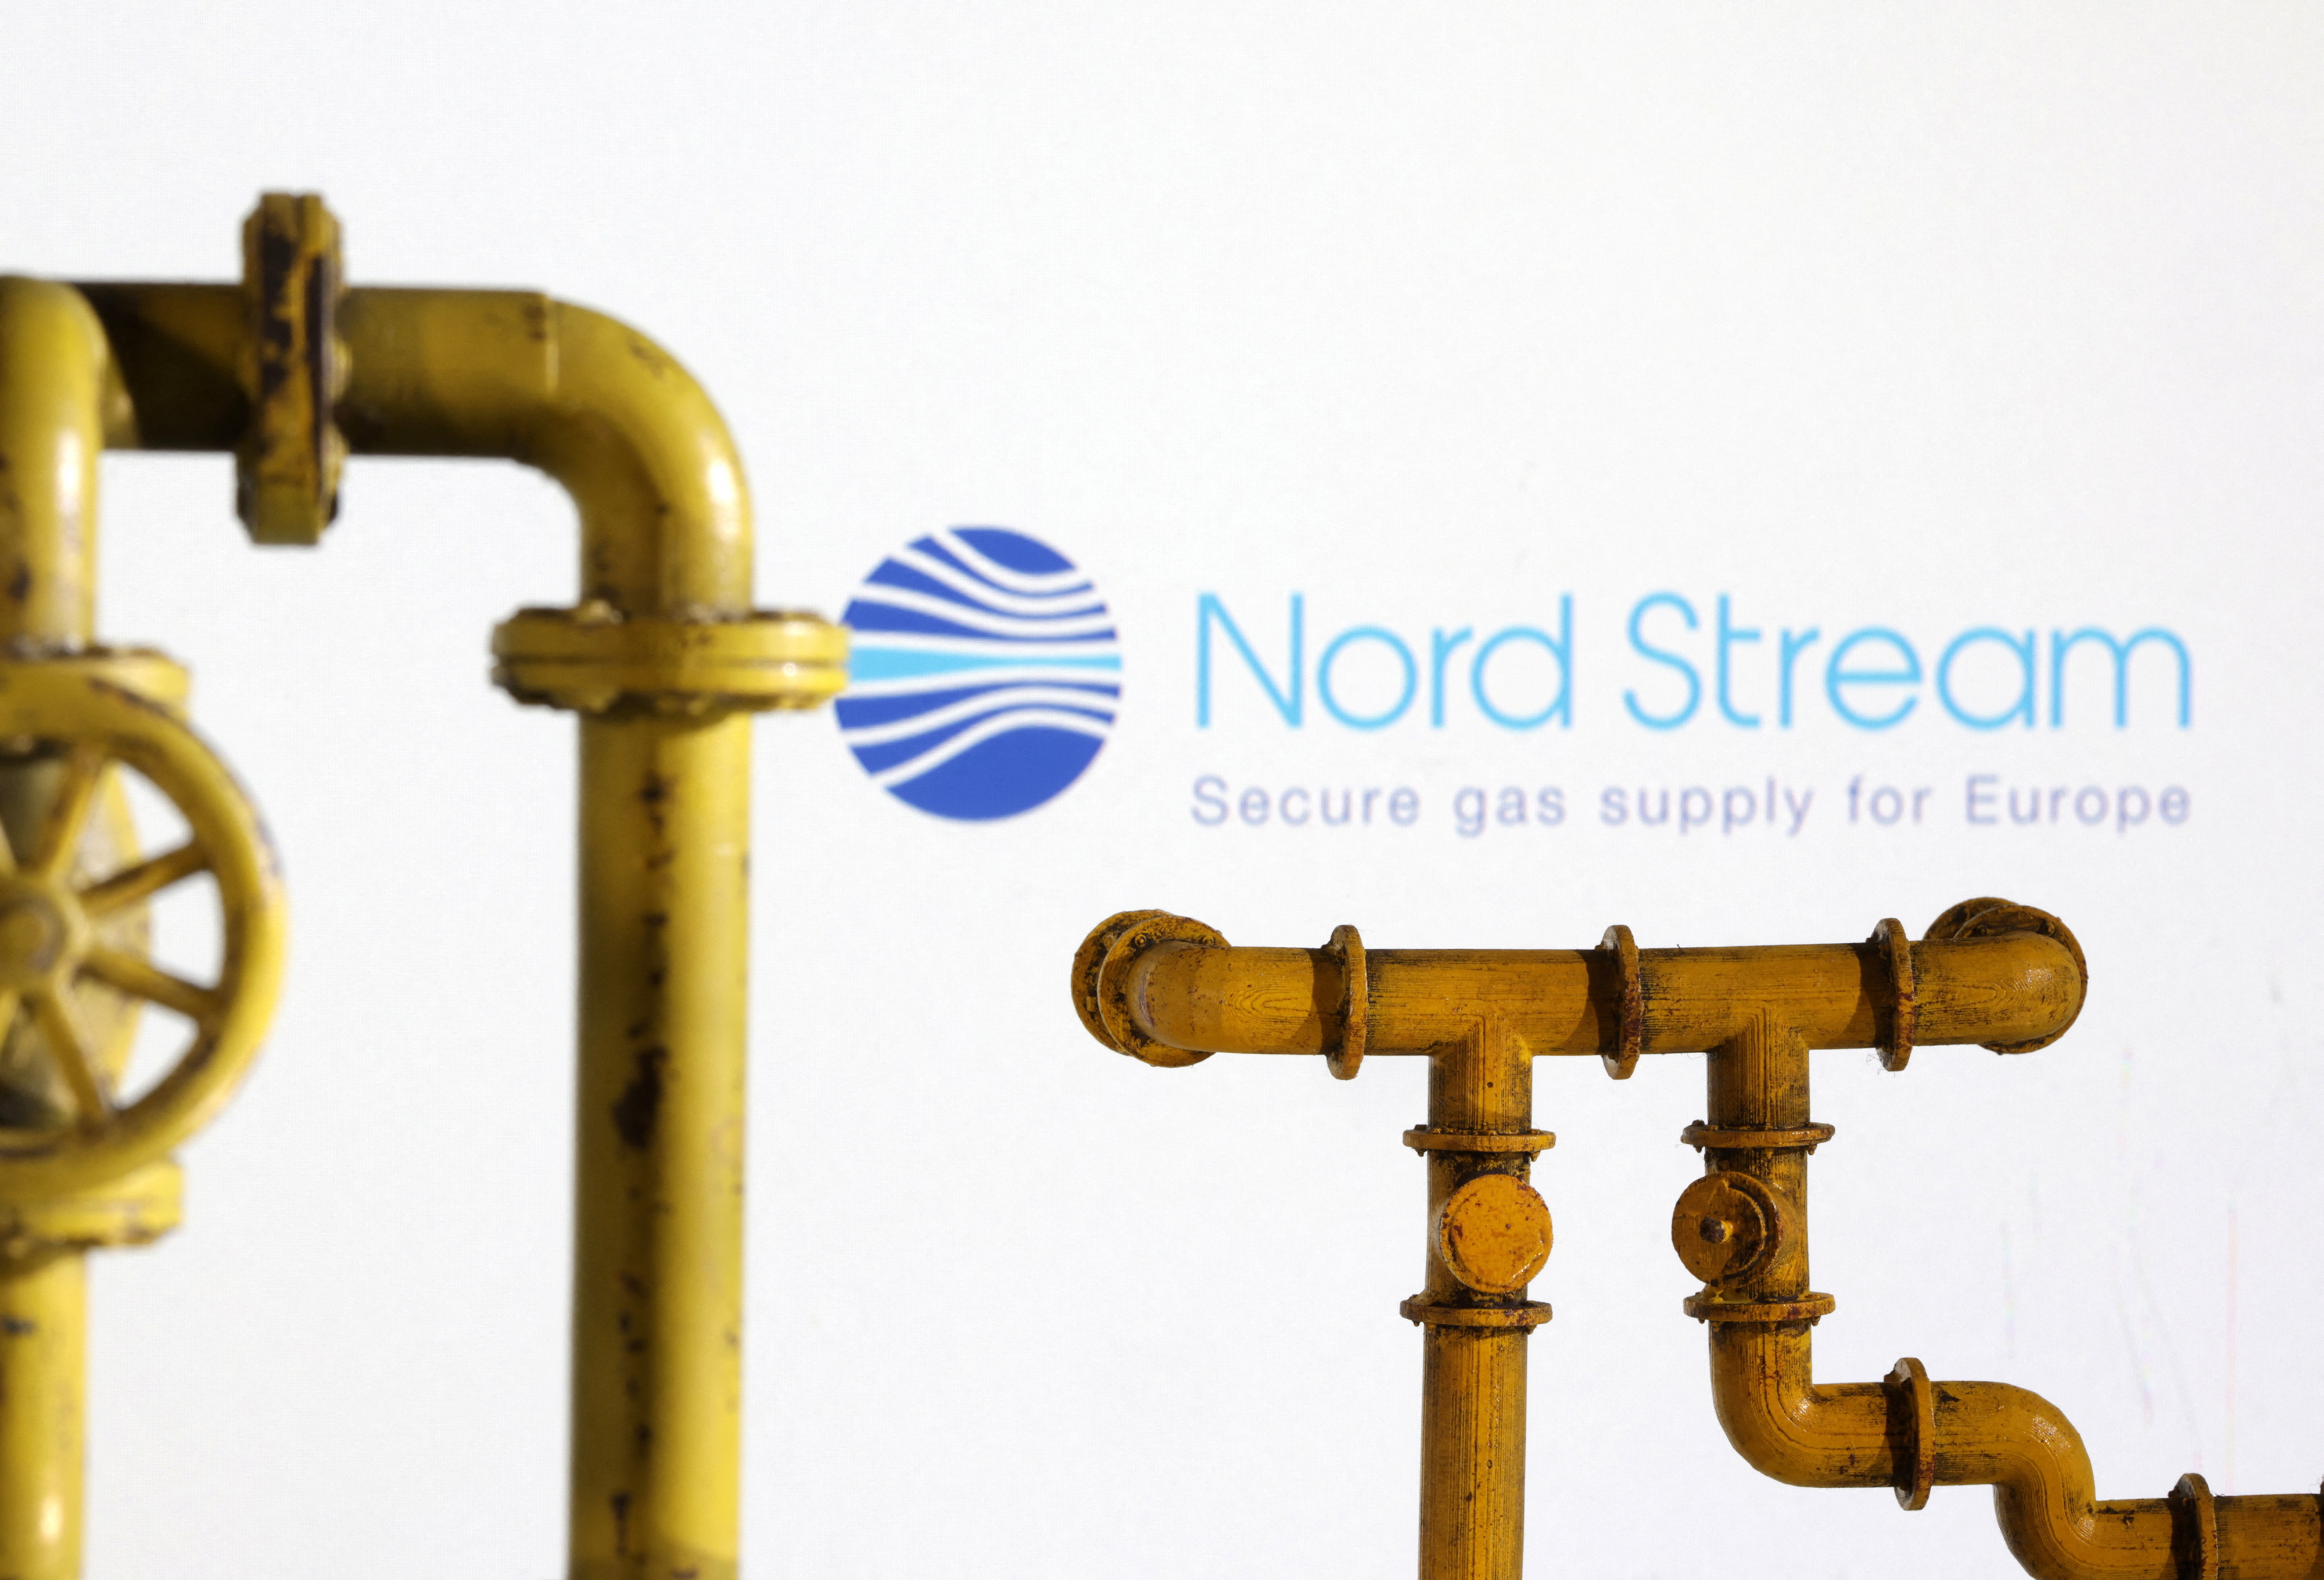 Illustration shows natural gas pipeline and Nord Stream logo